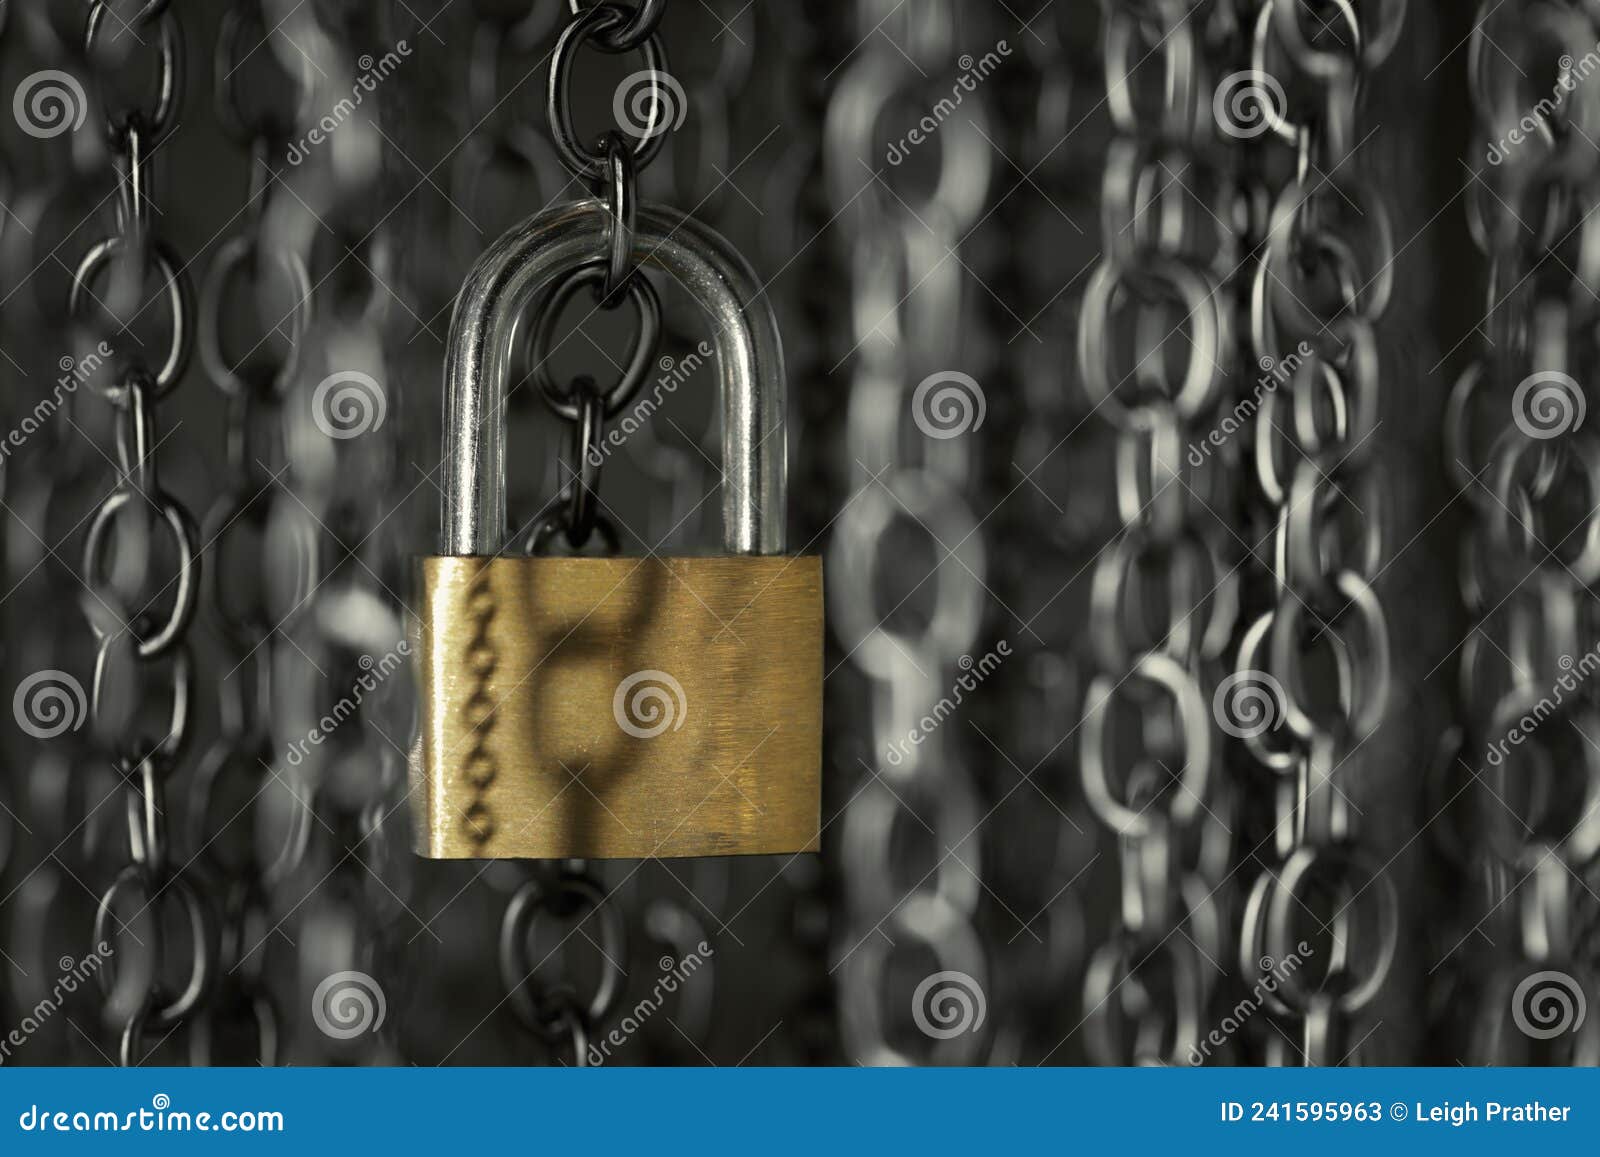 metal chains hanging vertically with a shiny lock. business data encryption, home security, or other safeguarding metaphor